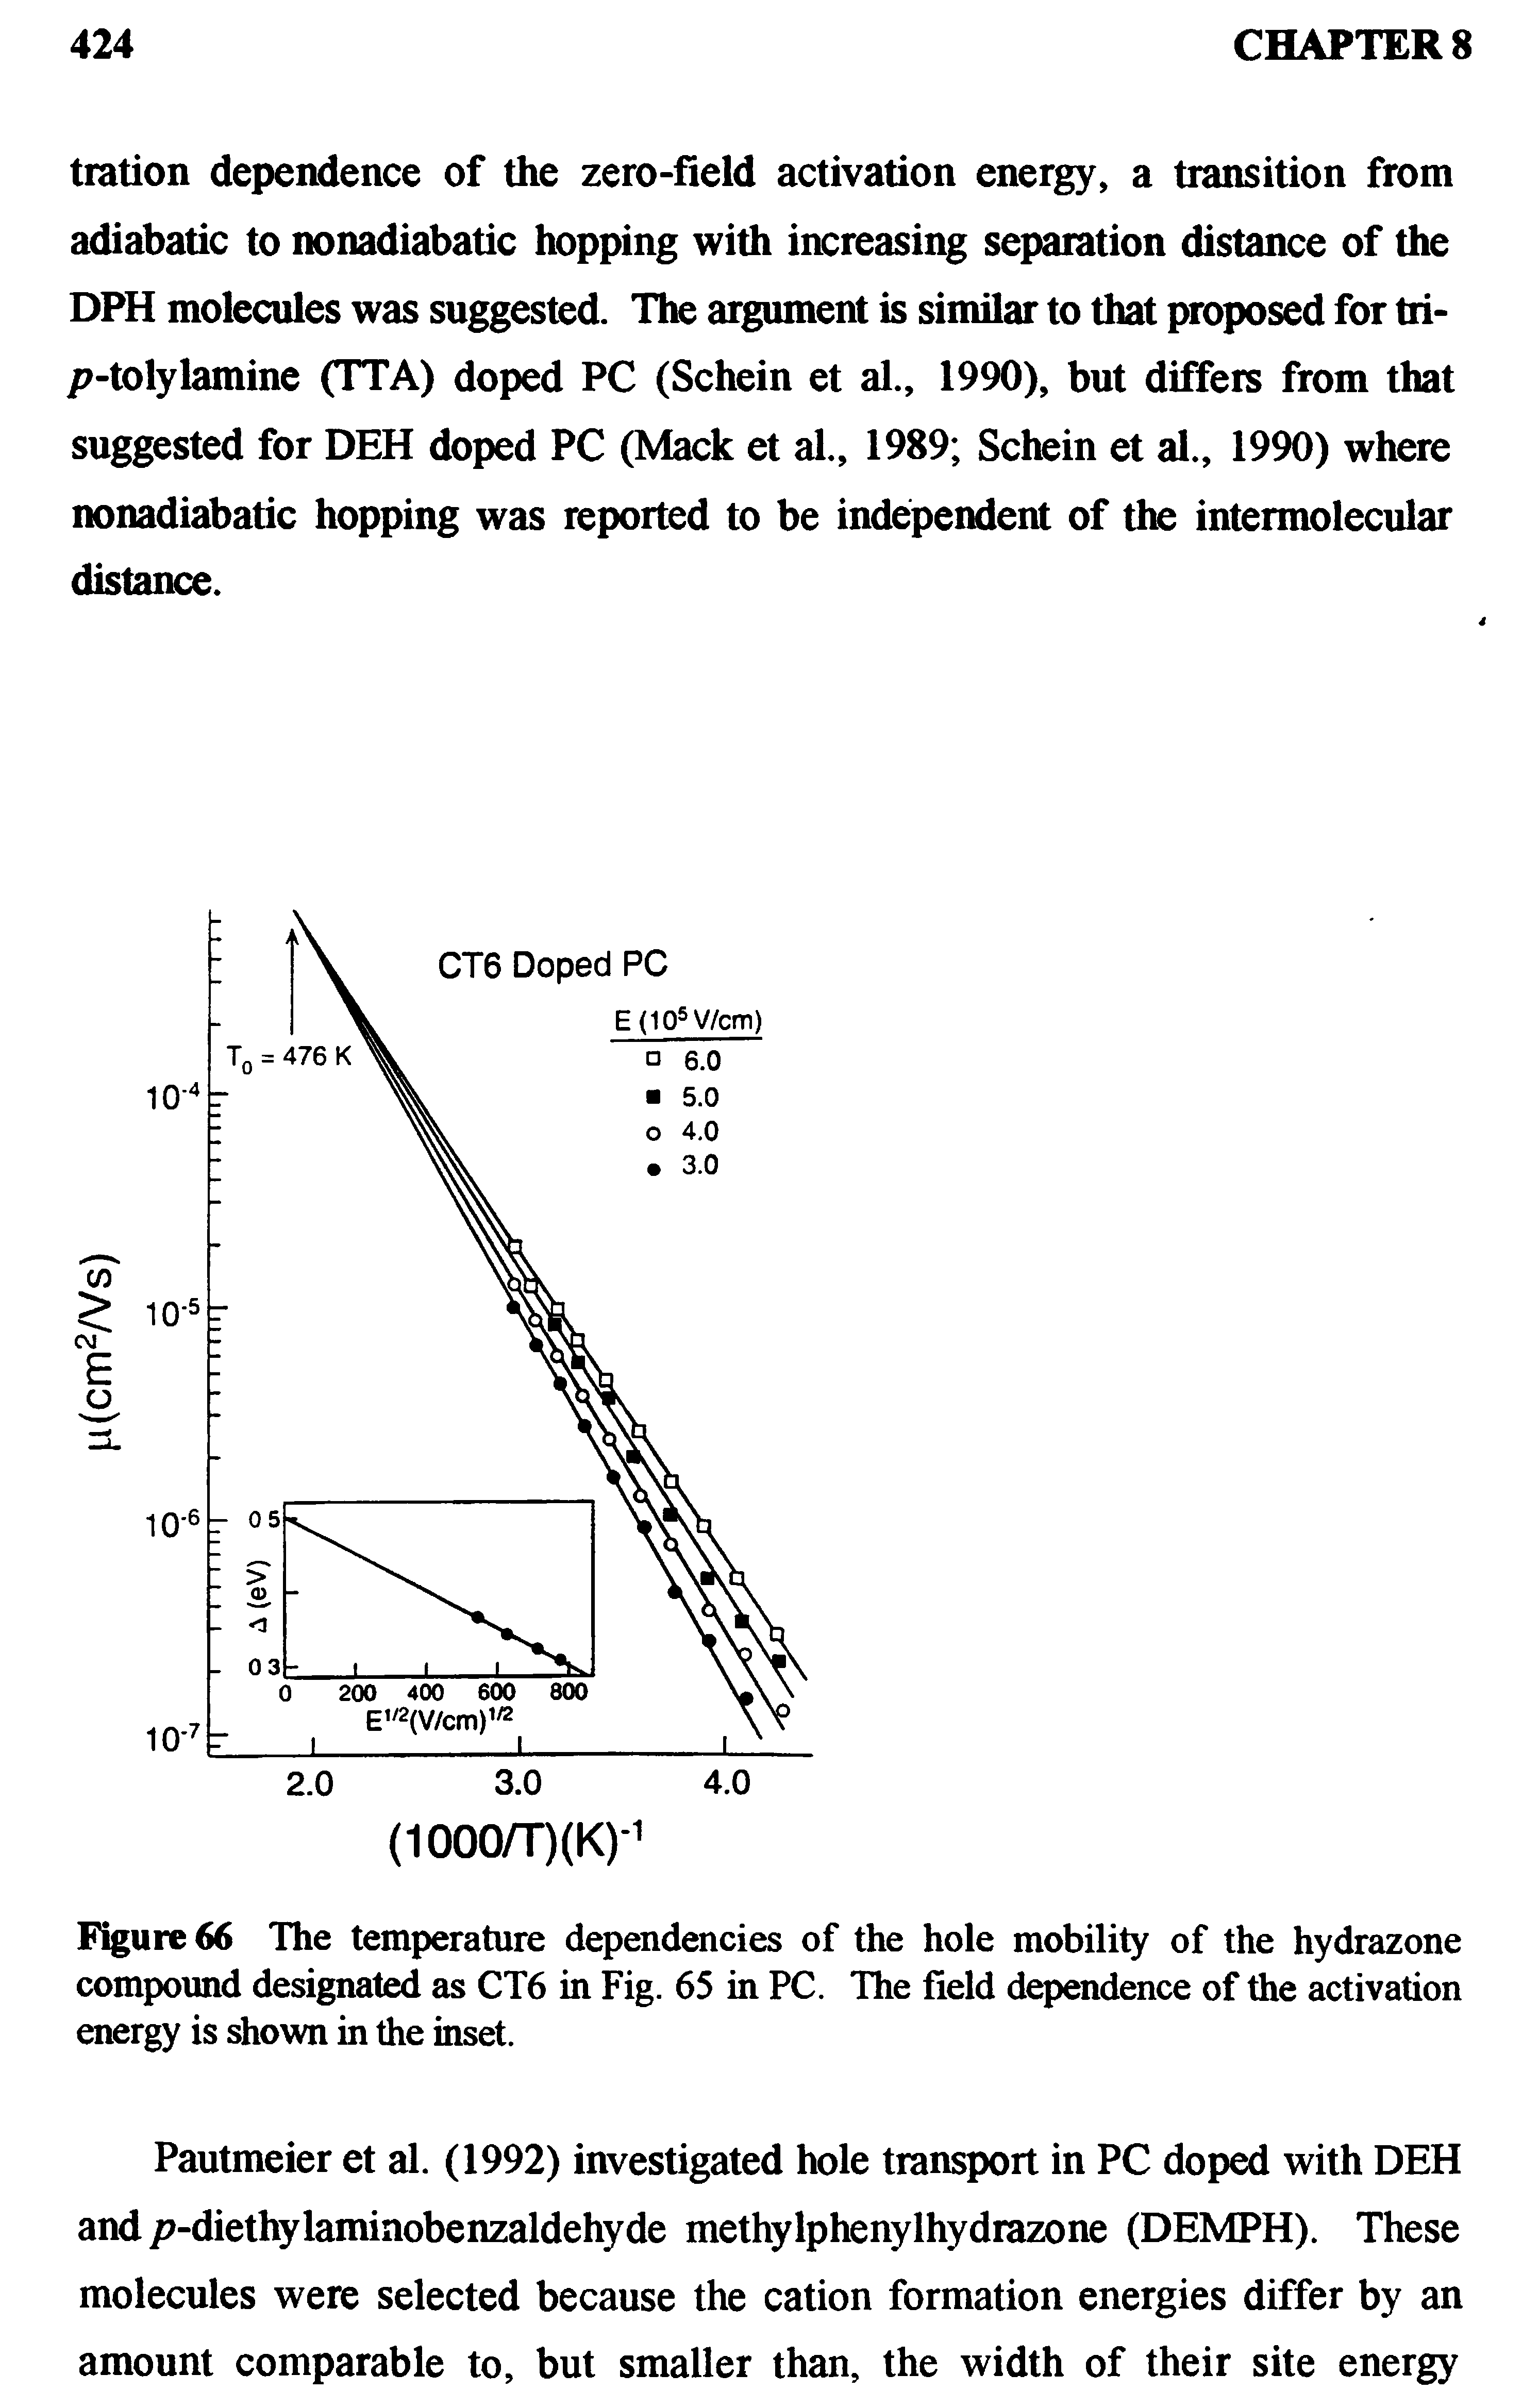 Figure 66 The temperature dependencies of the hole mobility of the hydrazone compound designated as CT6 in Fig. 65 in PC. The field dependence of the activation energy is shown in the inset.